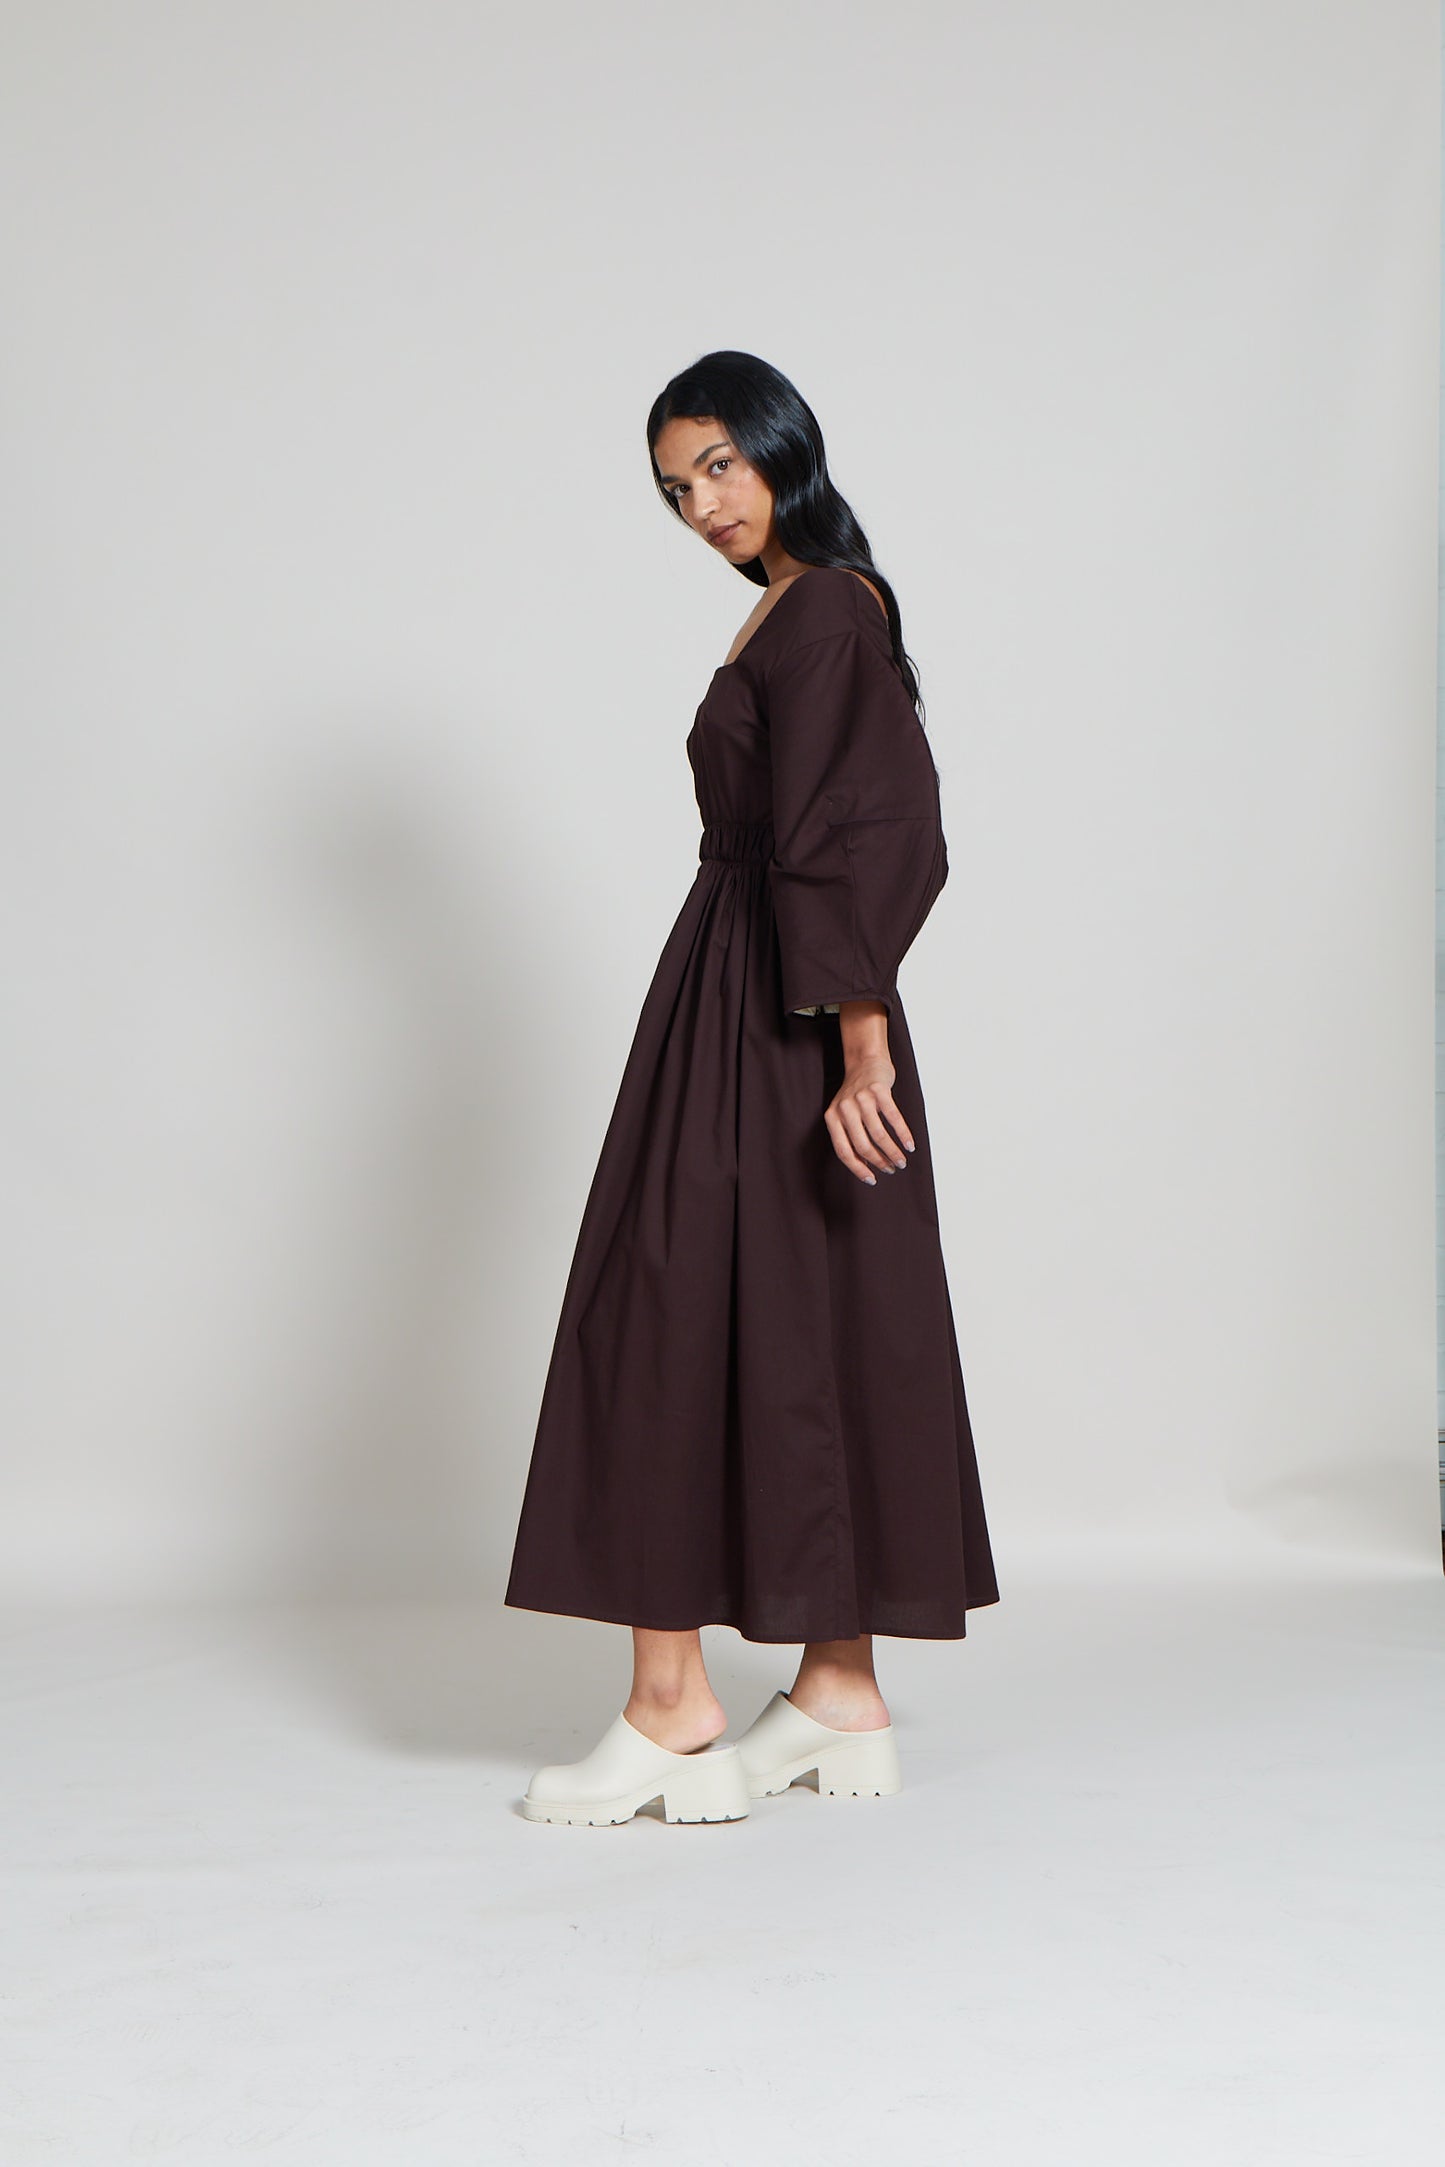 The Bell Sleeve Gathered Dress